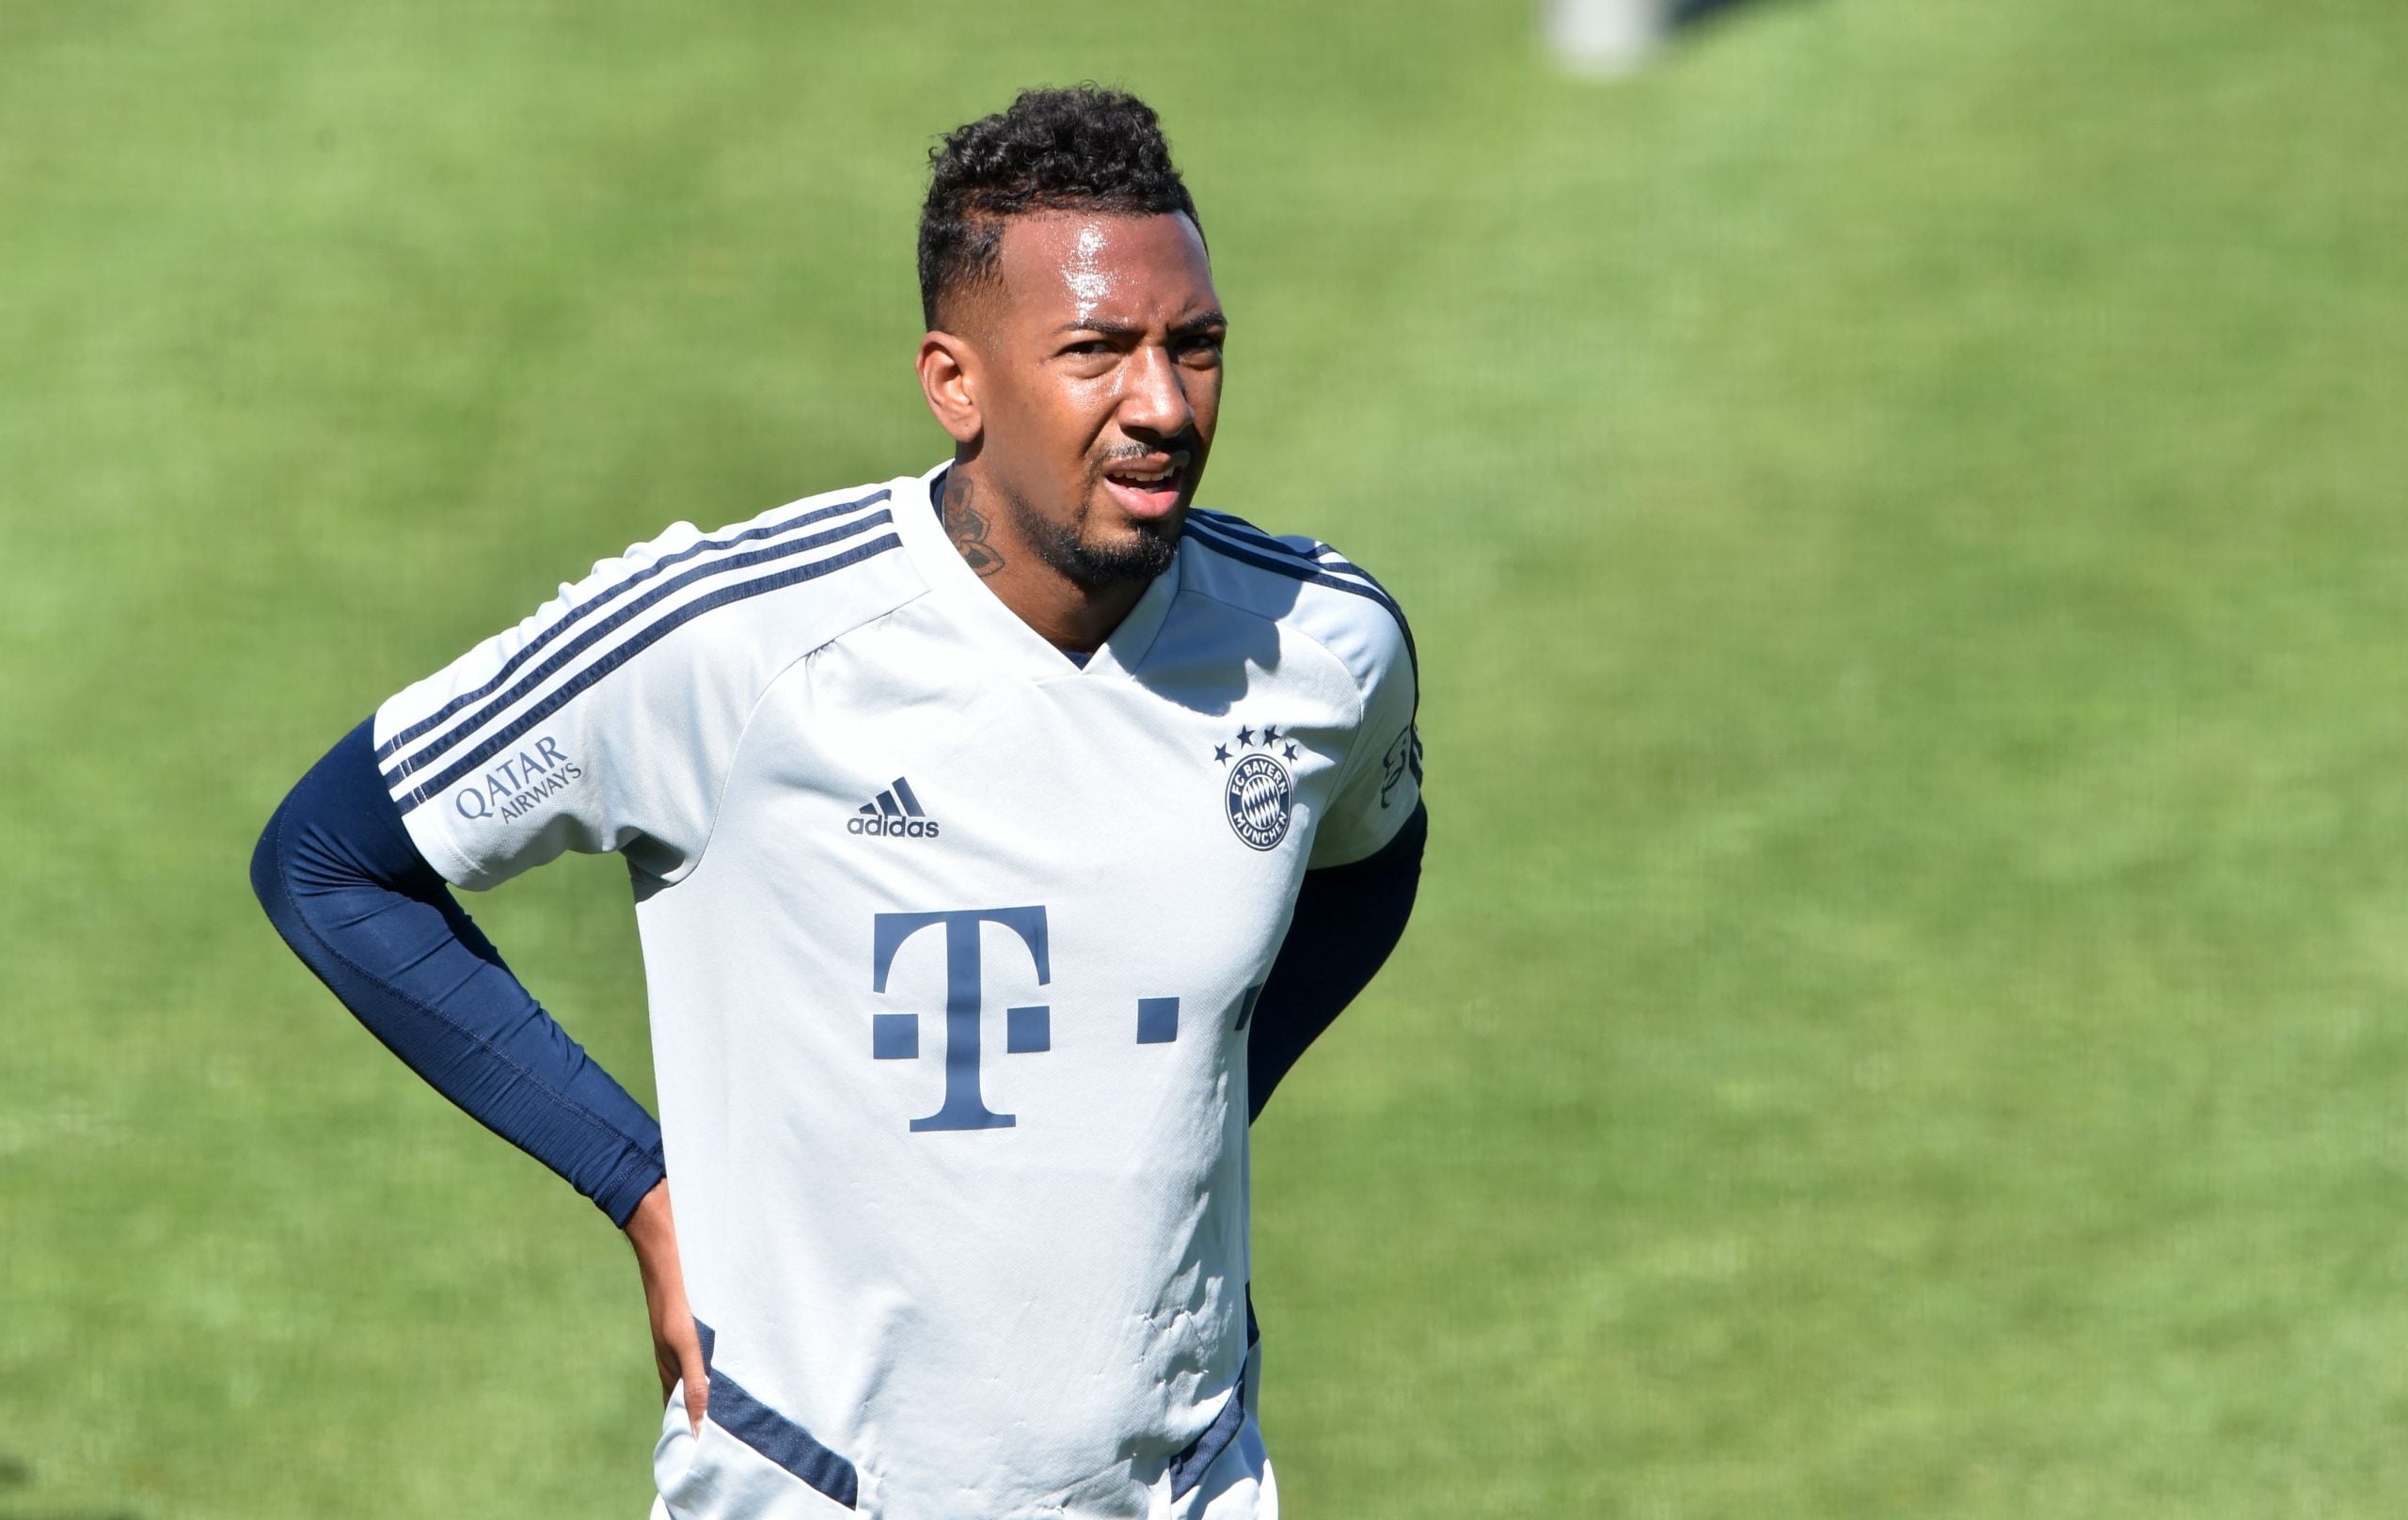 Why Bayern Munich Should Keep Hold Of Jerome Boateng - His experience is invaluable.